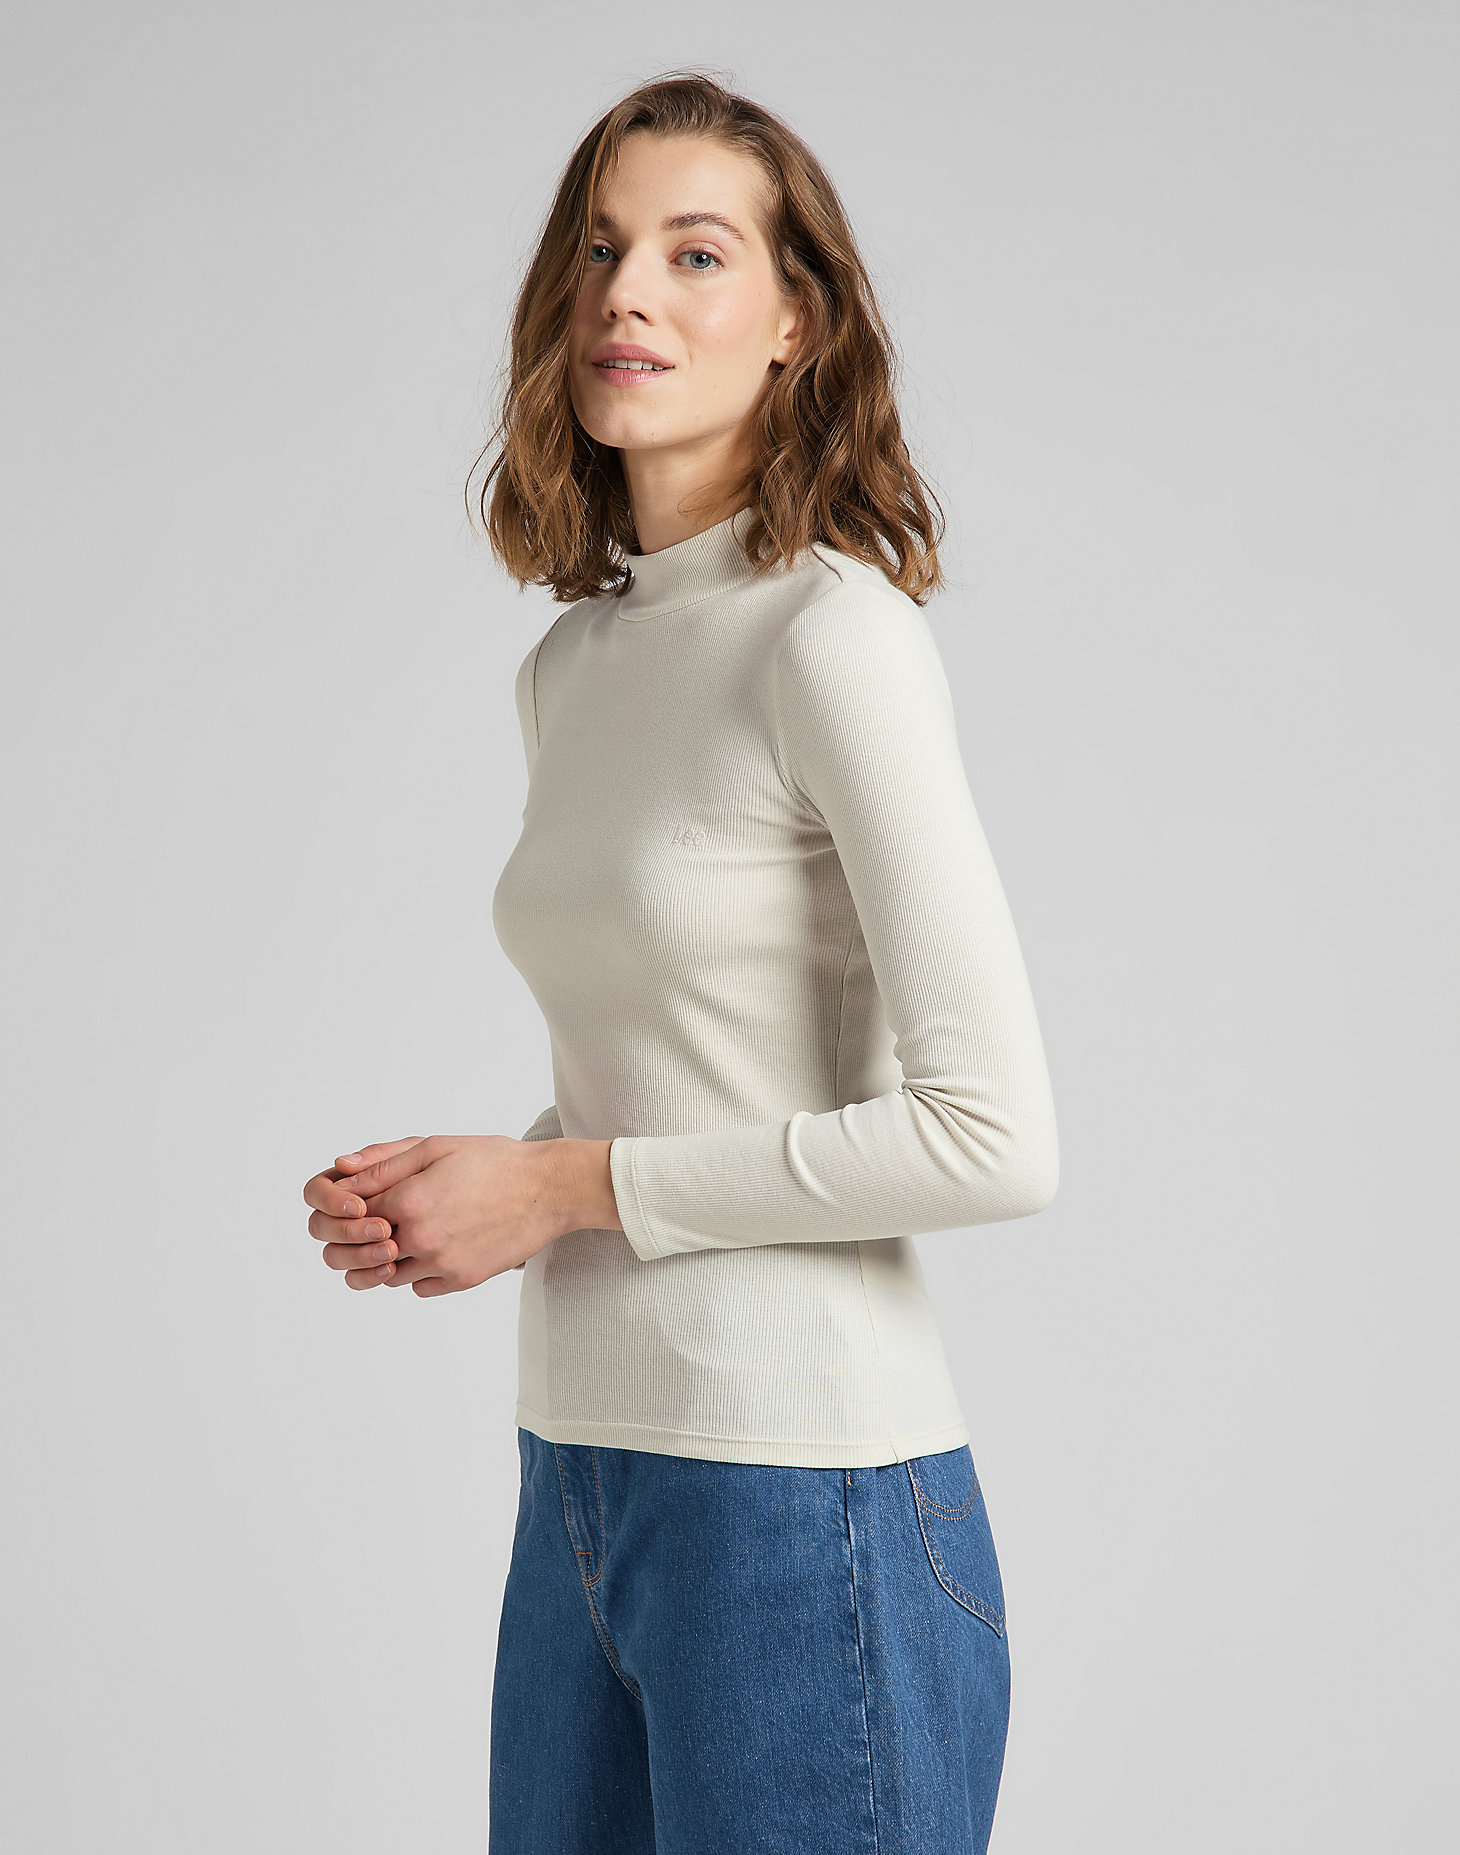 Ribbed Long Sleeve Tee in Workwear White alternative view 3